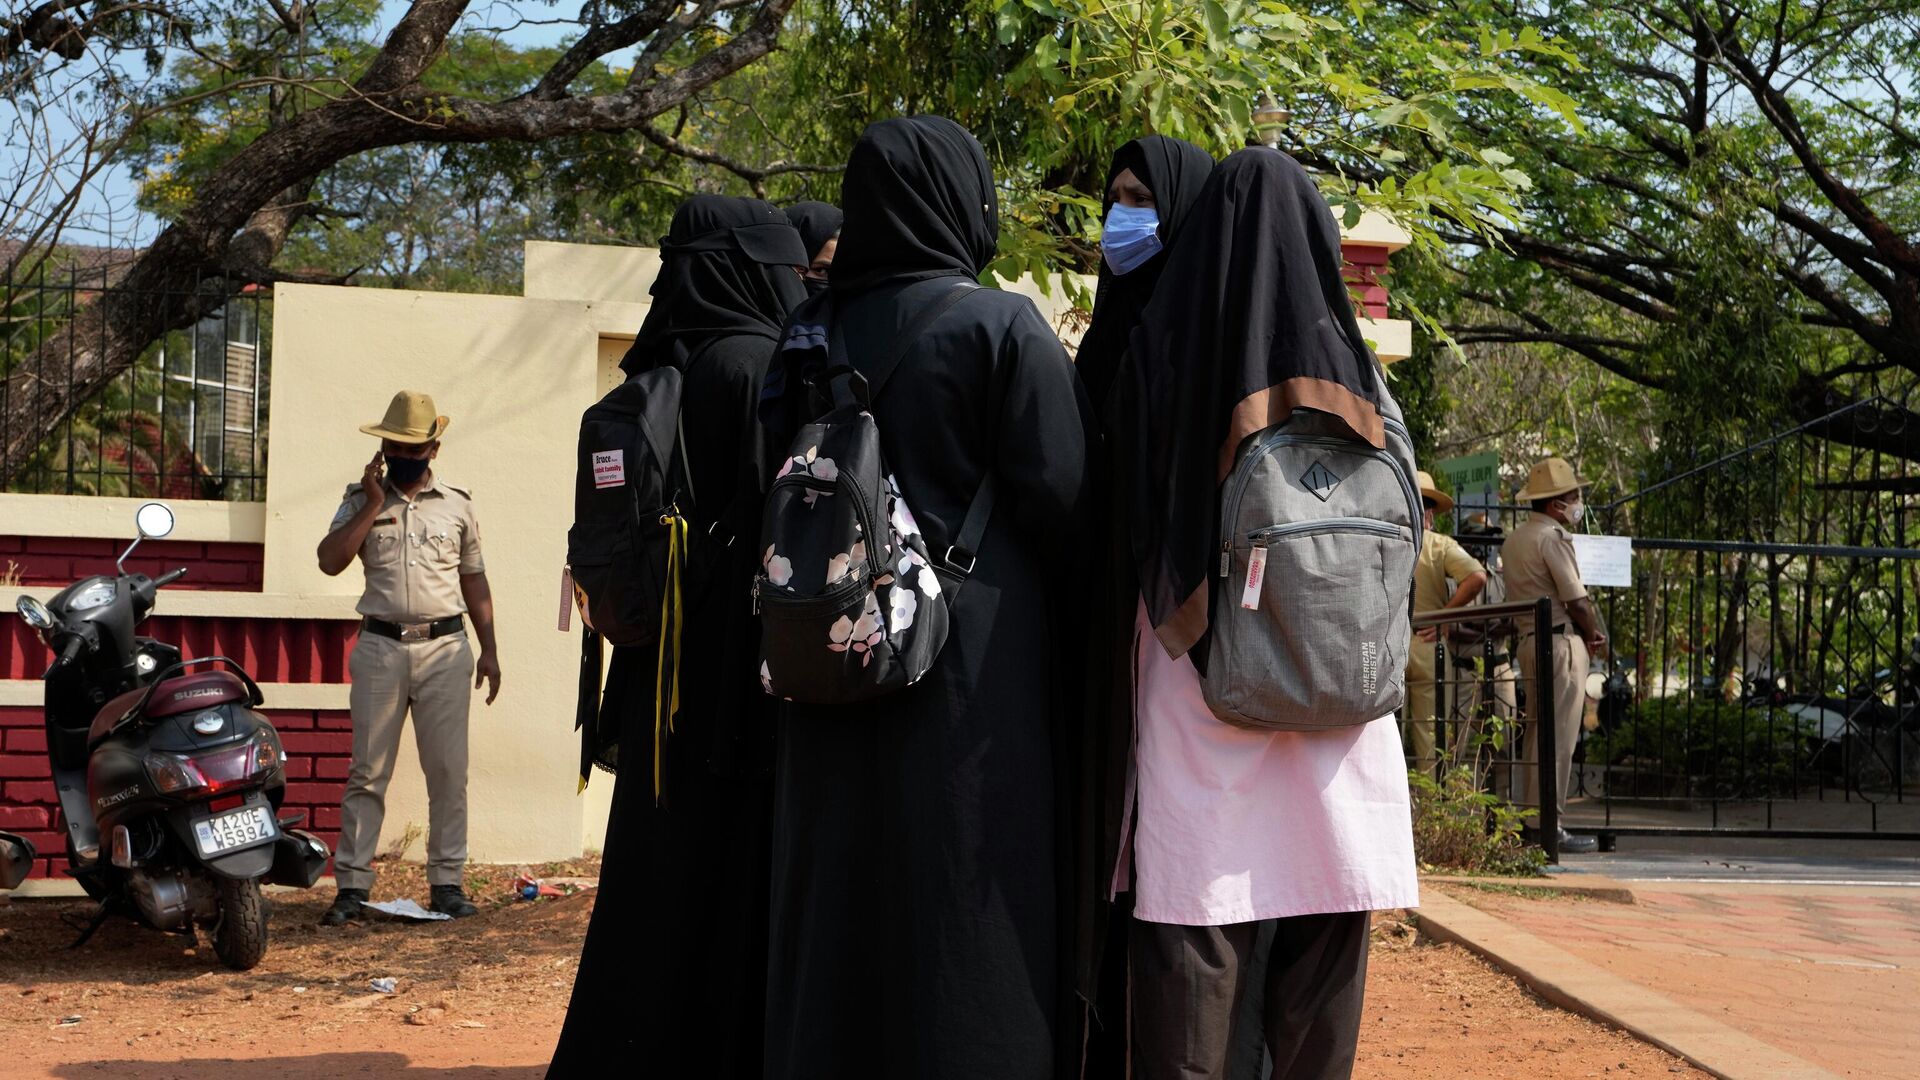 An Indian Muslim student wearing school uniform and hijab listens to fellow students wearing burqas after they were denied entry into the campus of Mahatma Gandhi Memorial college in Udupi, Karnataka state, India, Thursday, Feb. 24, 2022 - Sputnik International, 1920, 07.06.2022